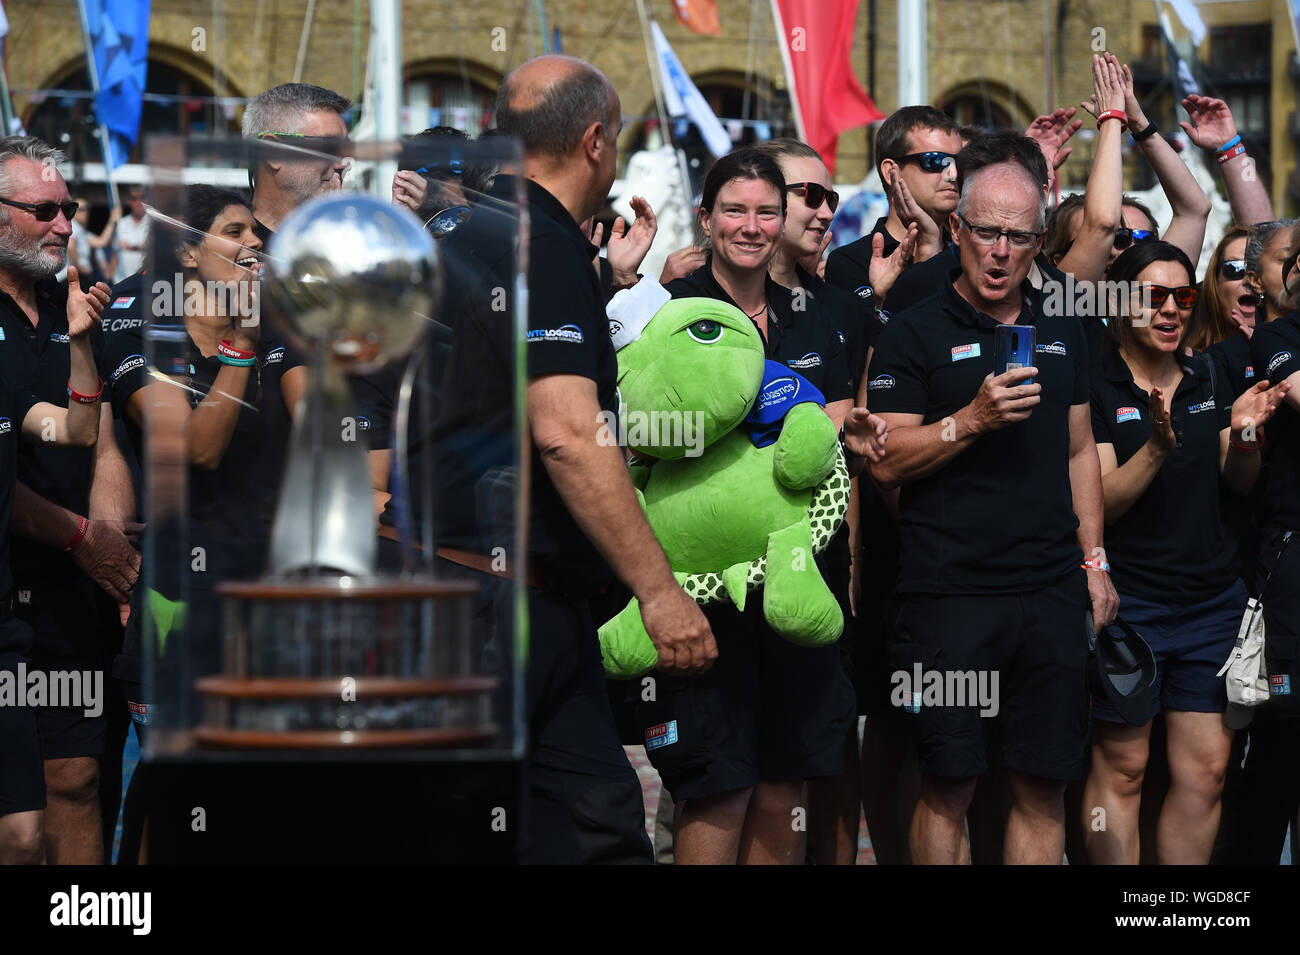 The Clipper Round the World Race trophy on display as WTC logistics wait to get on their boat, at the Departure Ceremony at St Katharine Docks Marina, by the river Thames in central London, before their departure down the river. Stock Photo